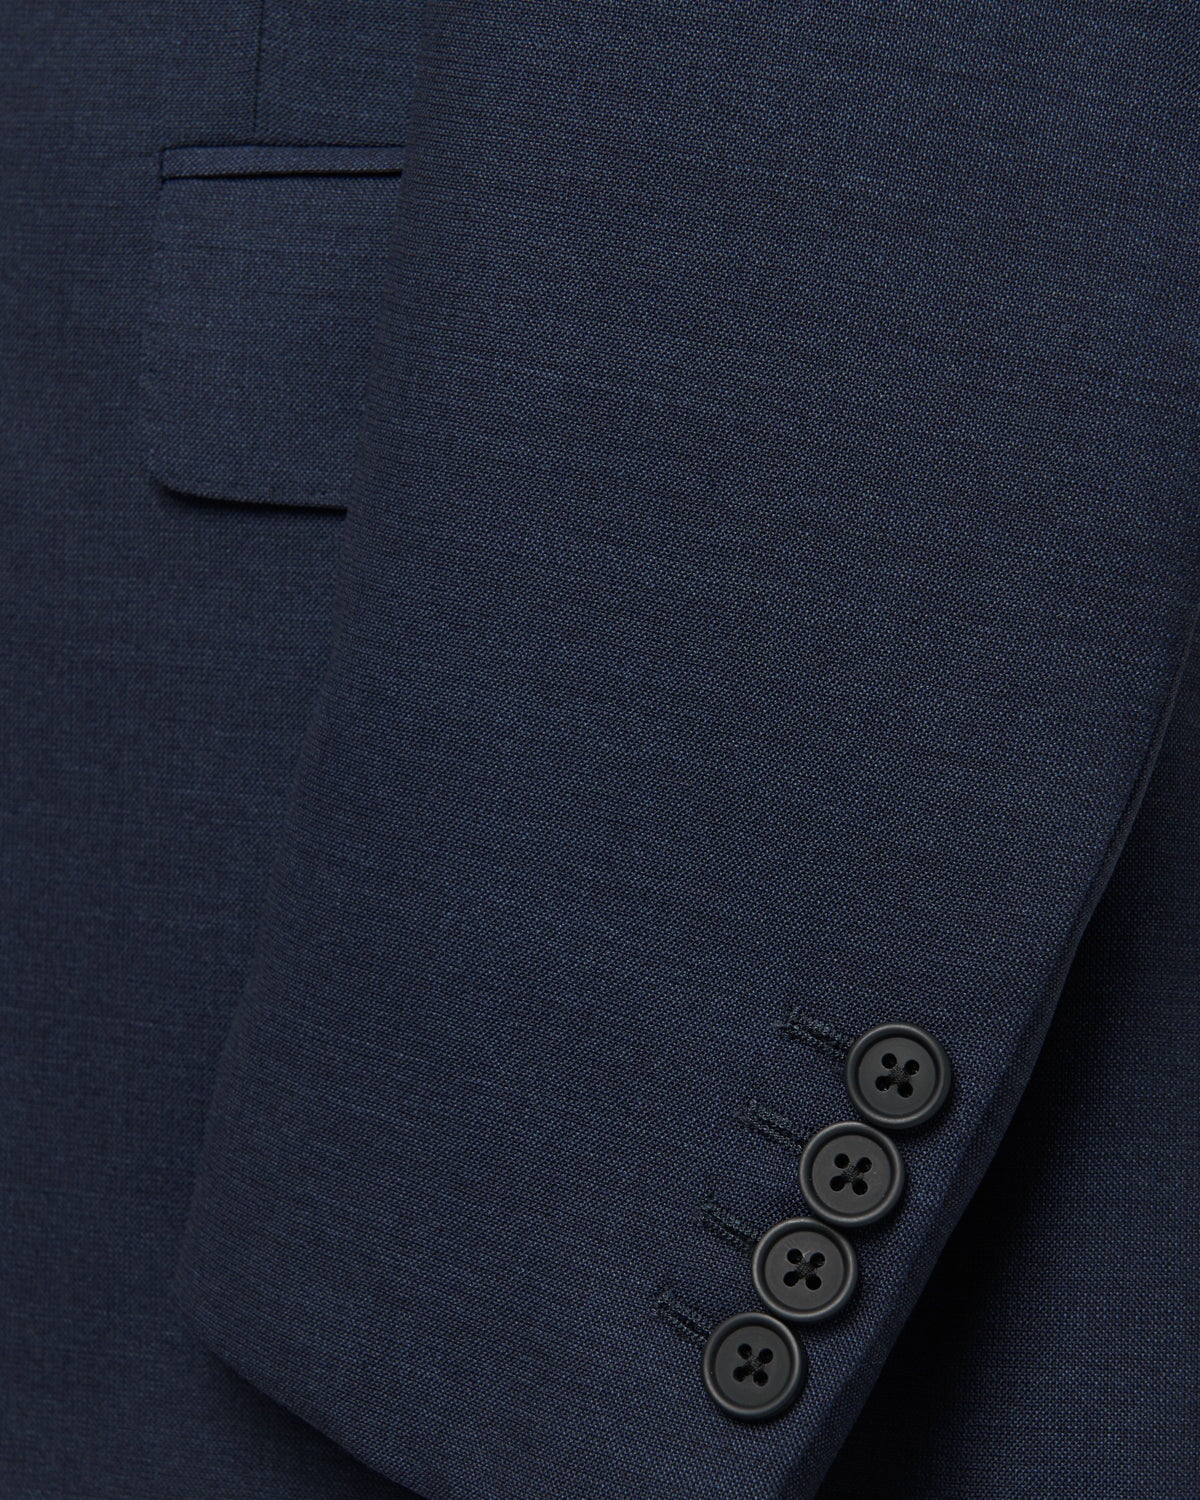 Kilgour Savile Row Tailoring SB1 KG Single Breasted Navy End on End Suit